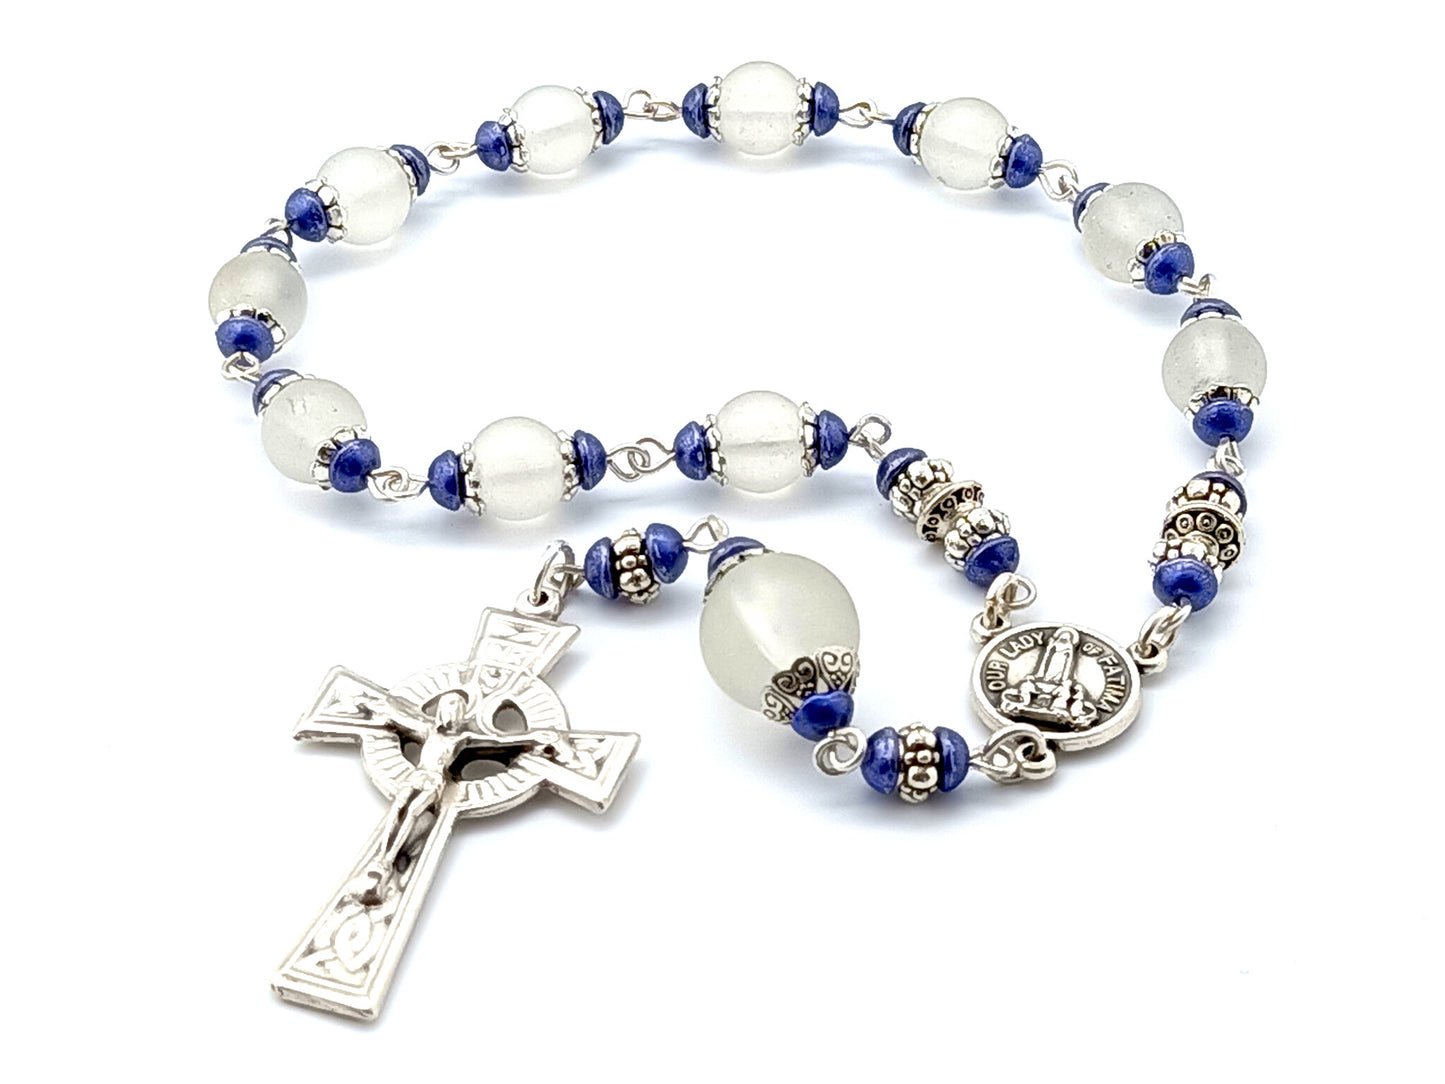 Our Lady of Fatima Relic medal single decade tenner rosary, Celtic crucifix, Fatima pocket rosary beads.